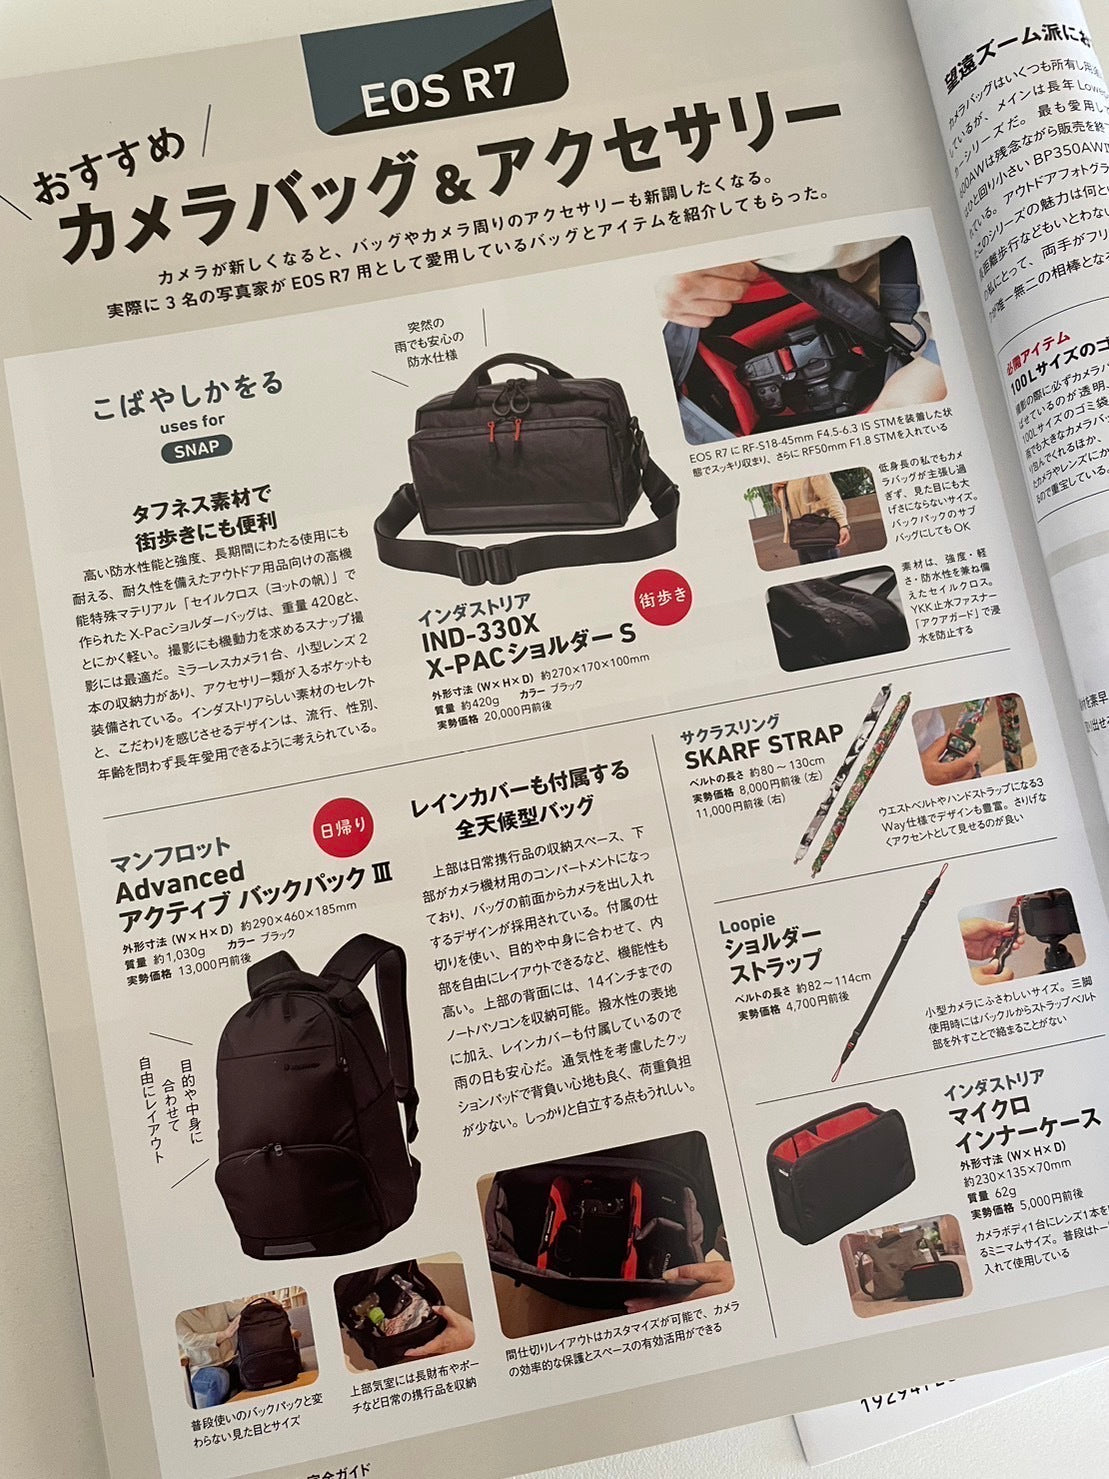 "IND-330X X-PAC Shoulder S" was published in the EOS R7 complete guide. 2